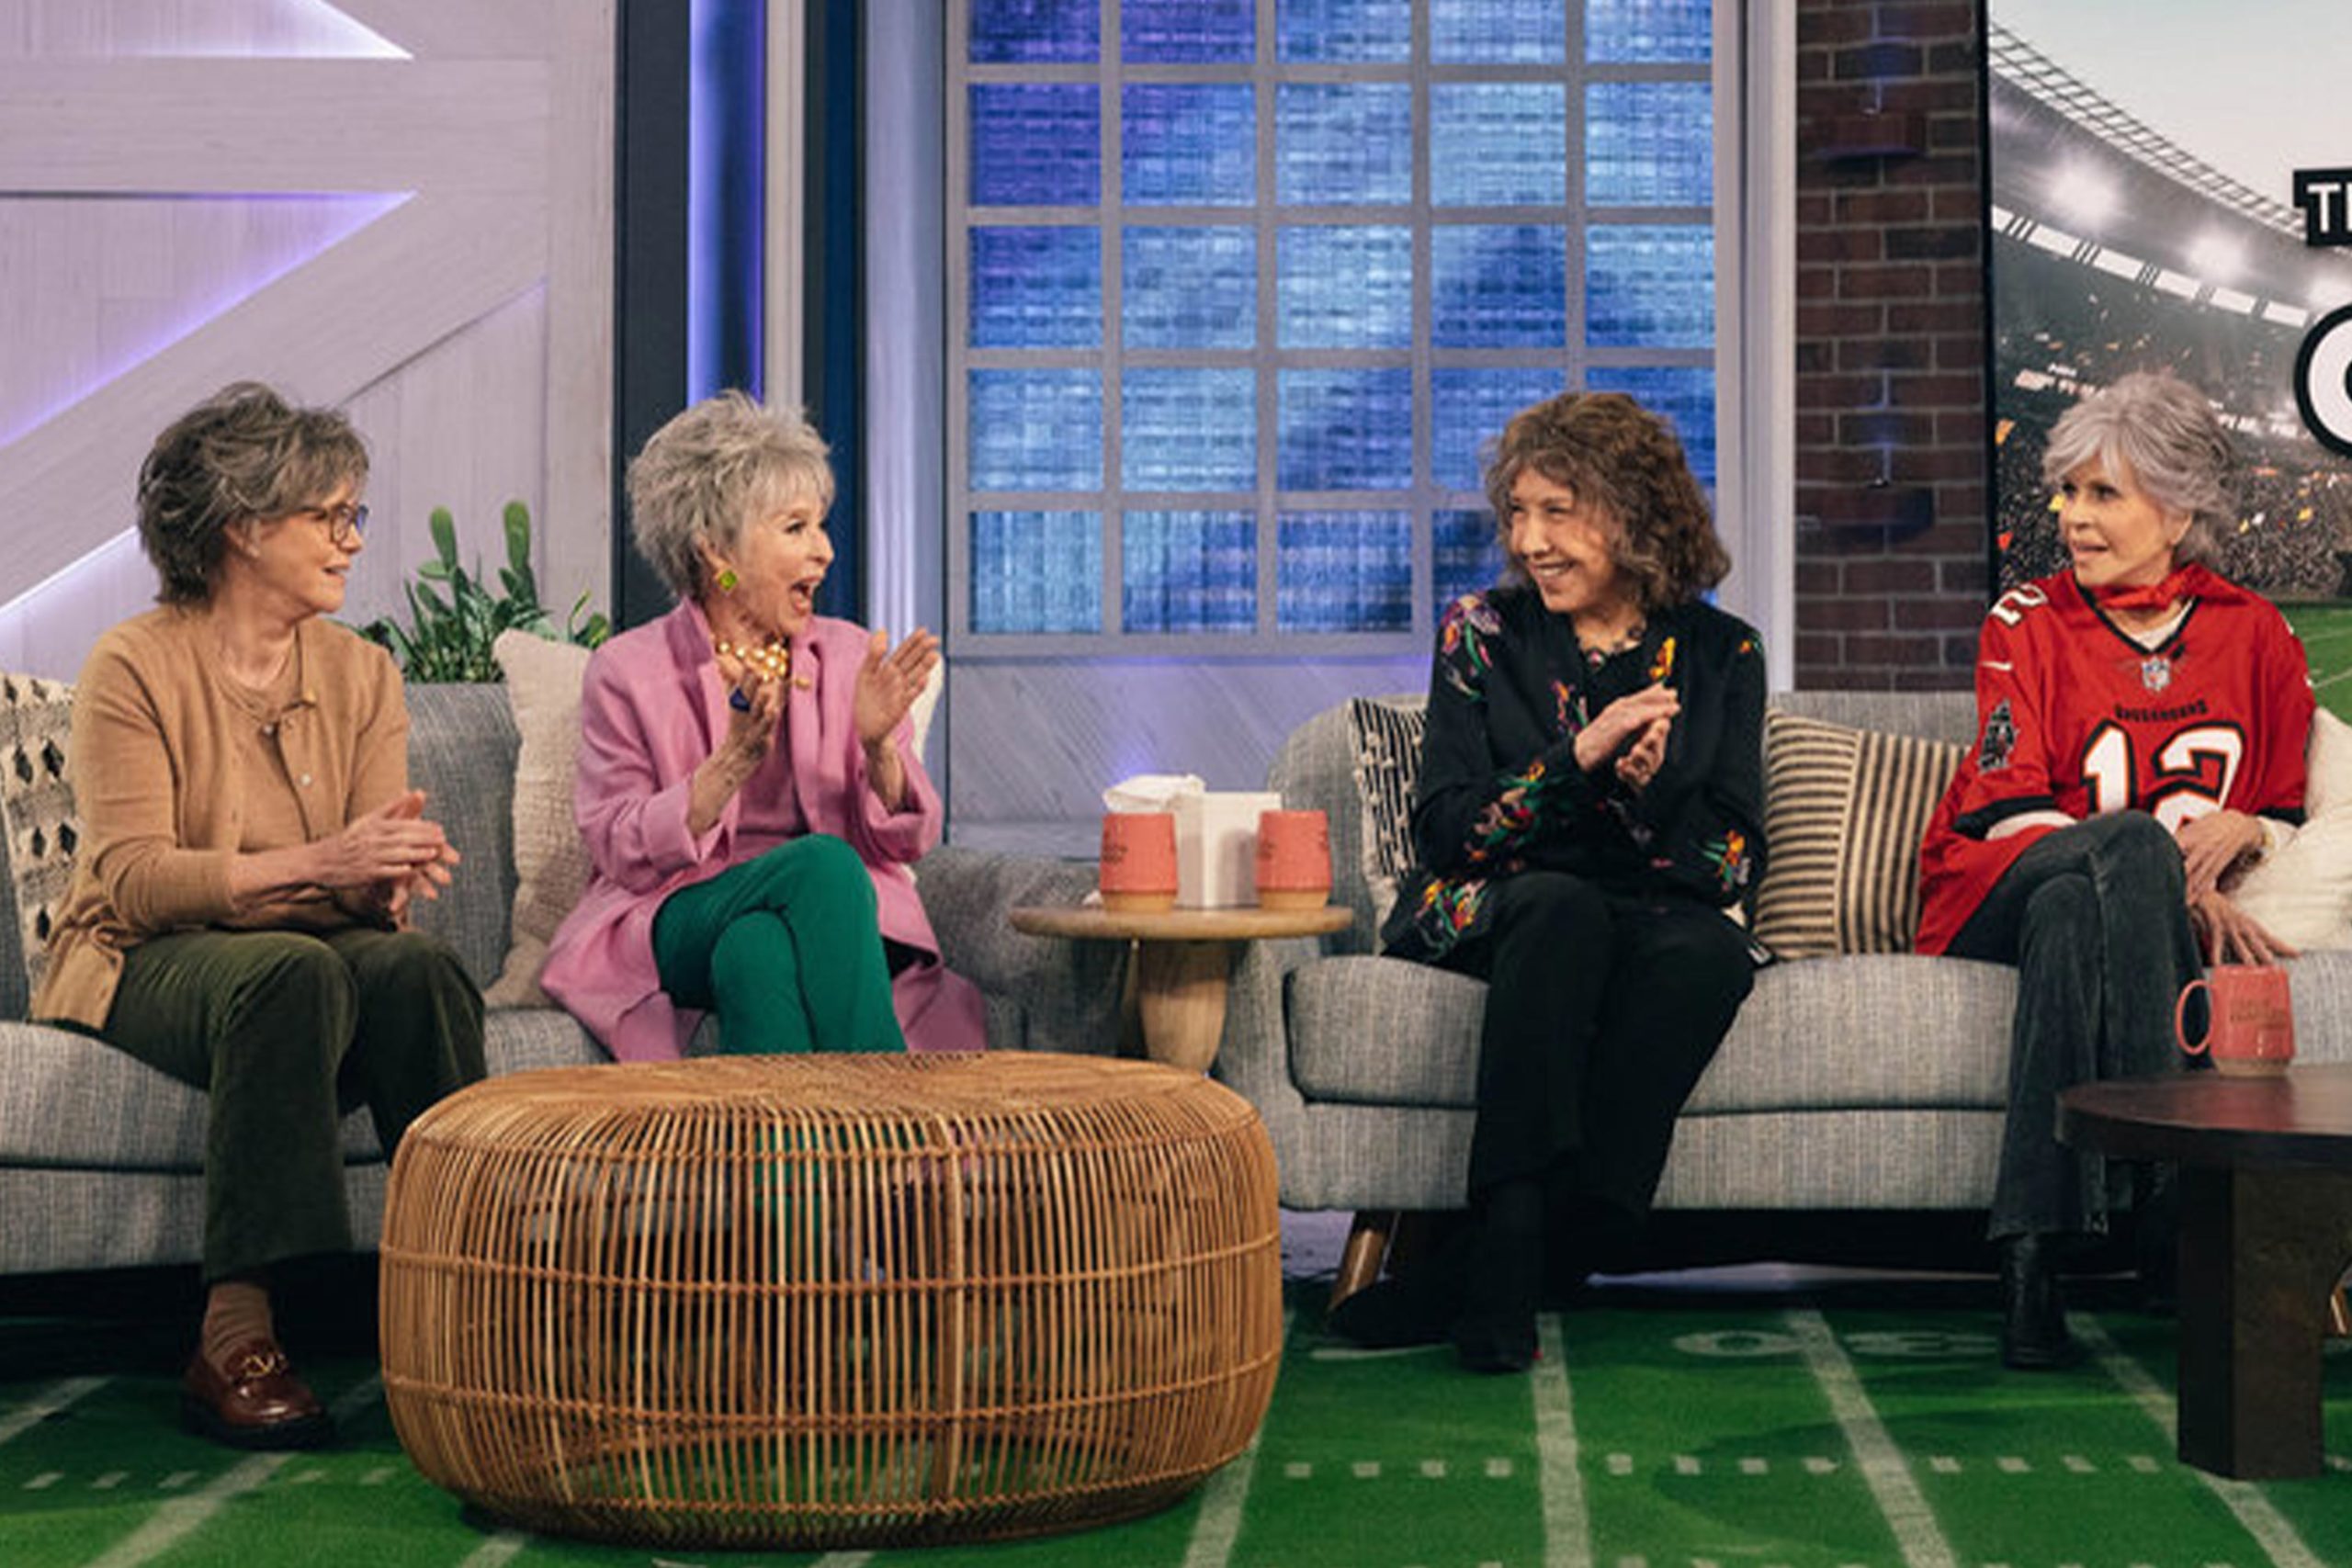 Hollywood legends Jane Fonda, Rita Moreno, Sally Field and Lily Tomlin  share laughs about starring in 80 For Brady